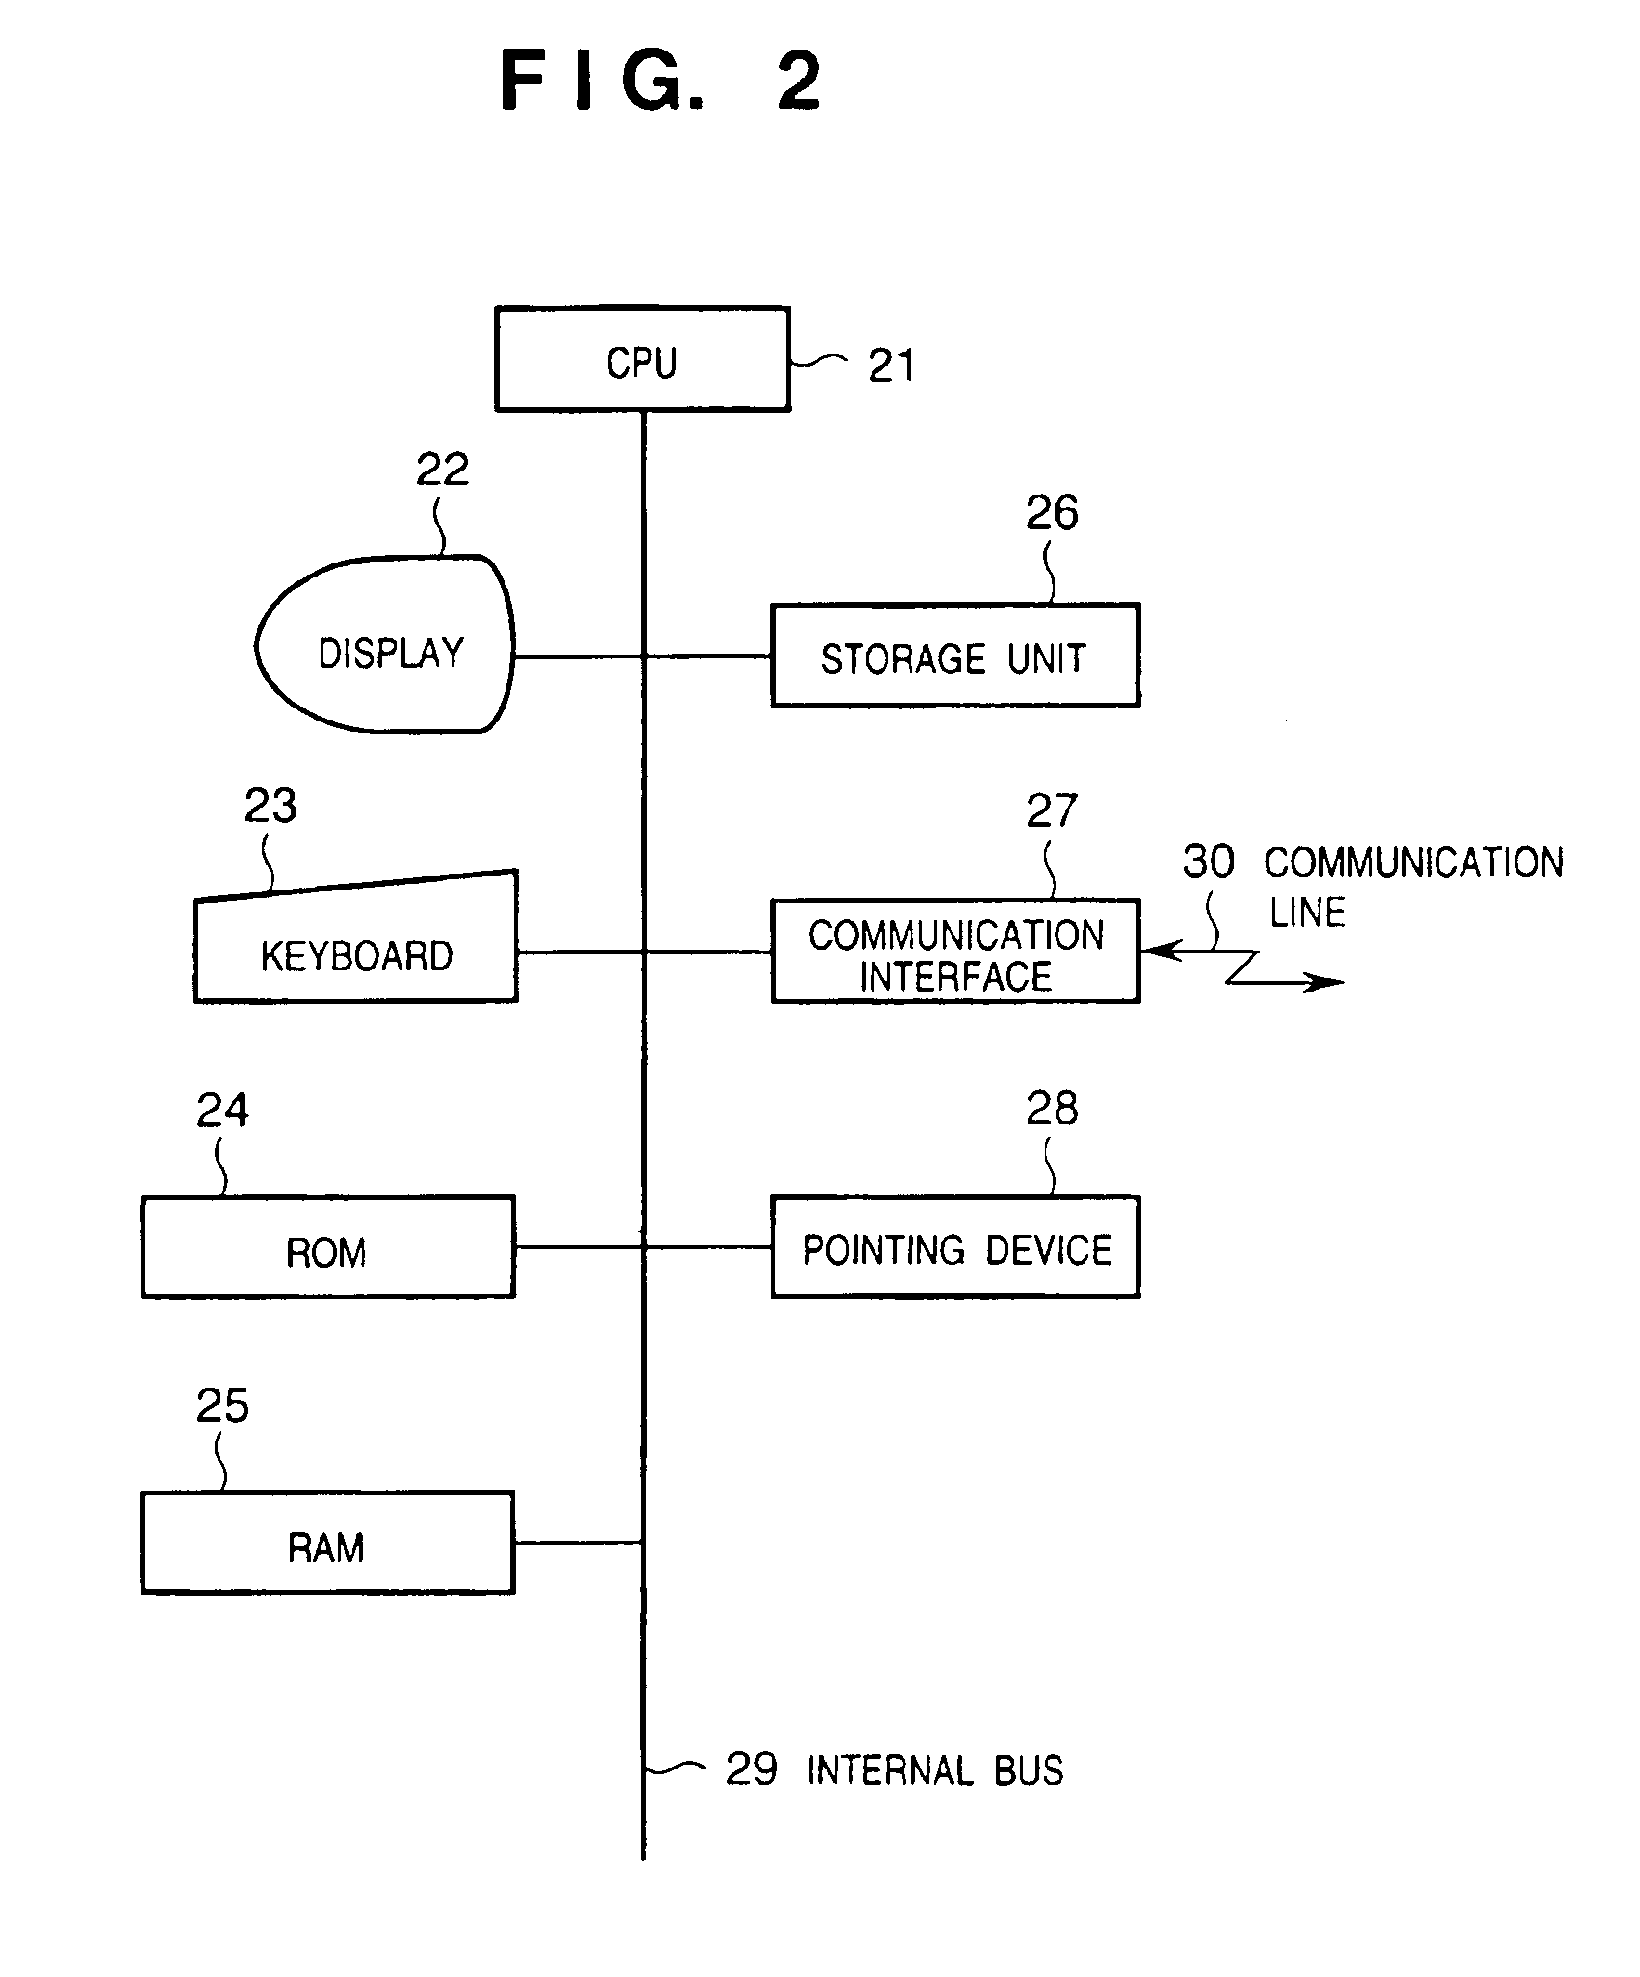 Purchase request approving apparatus, method, and storage medium storing same